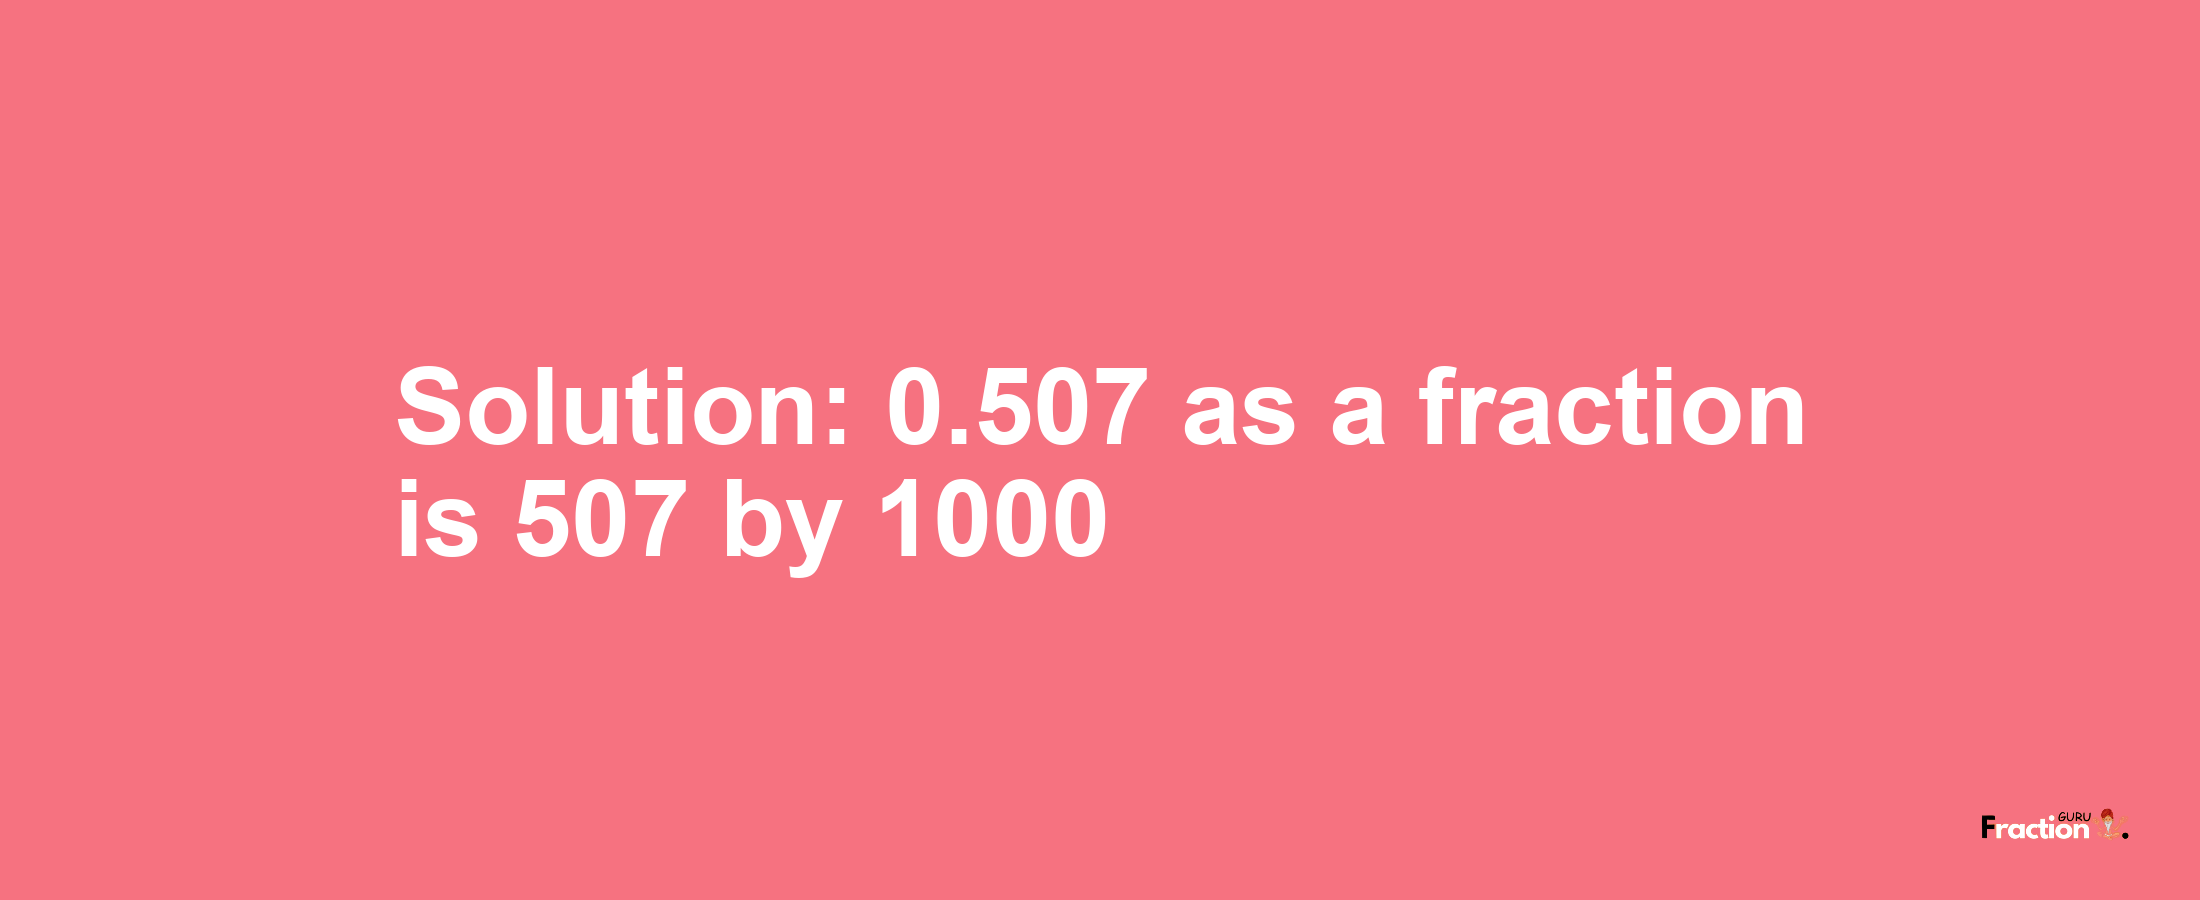 Solution:0.507 as a fraction is 507/1000